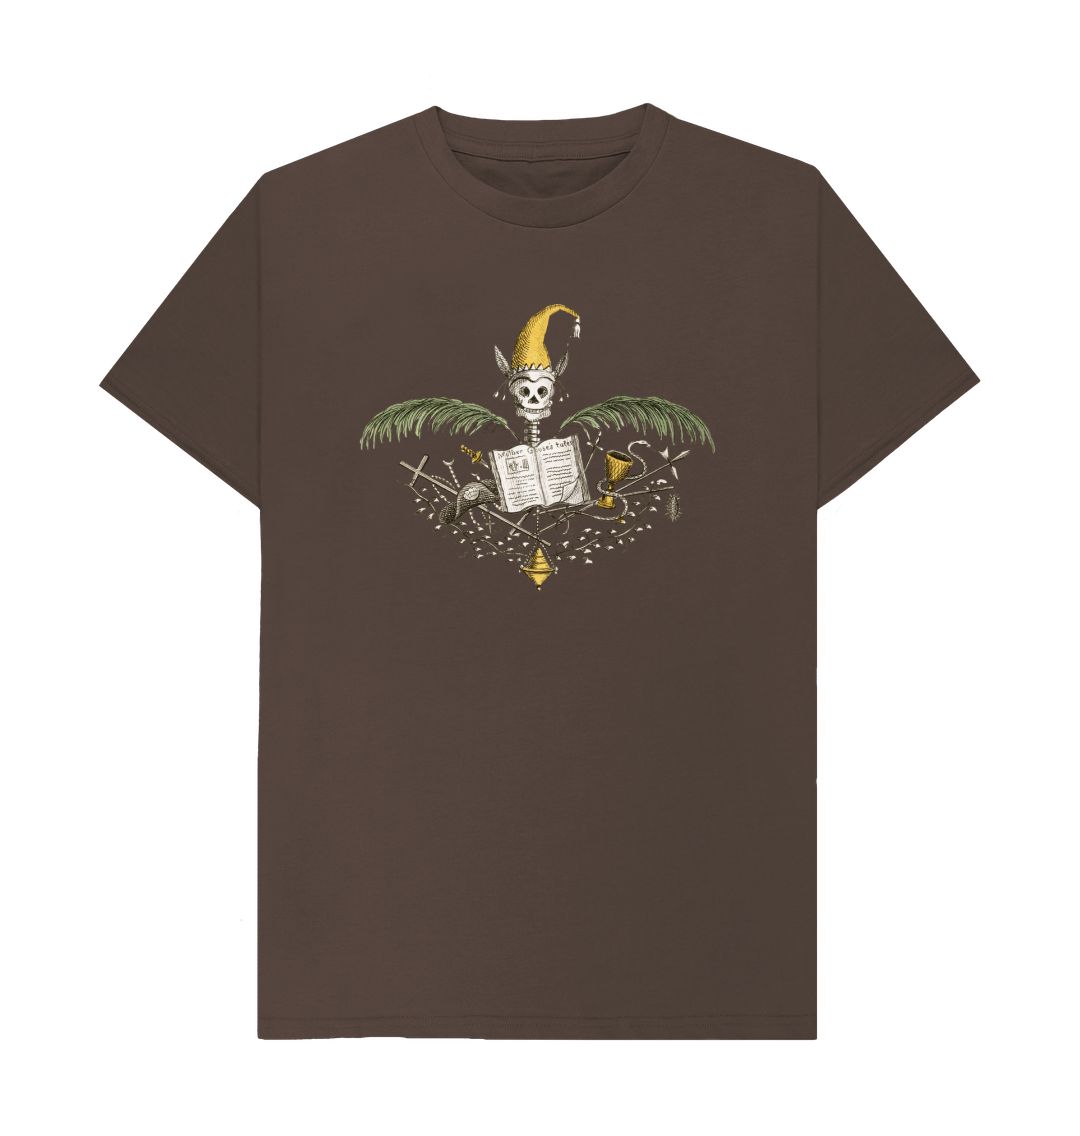 Chocolate Tales of Terror T-shirt